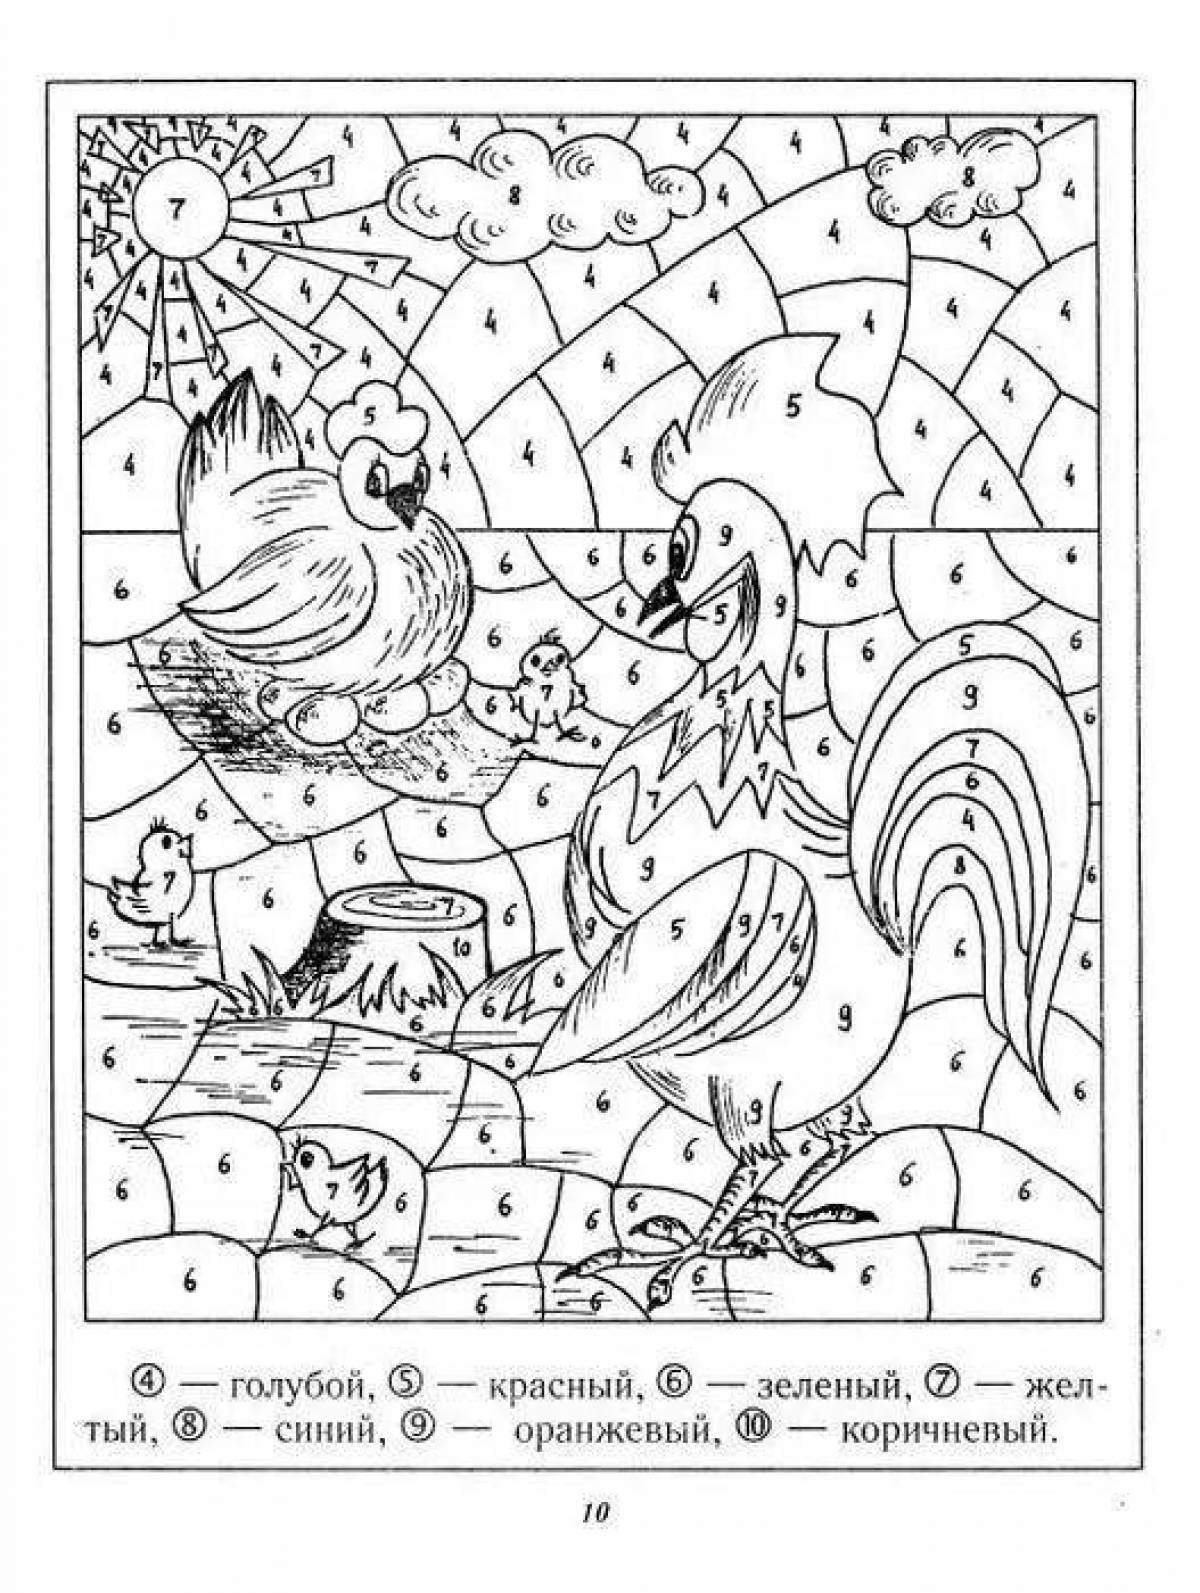 Stimulating coloring by numbers for 7-8 year olds